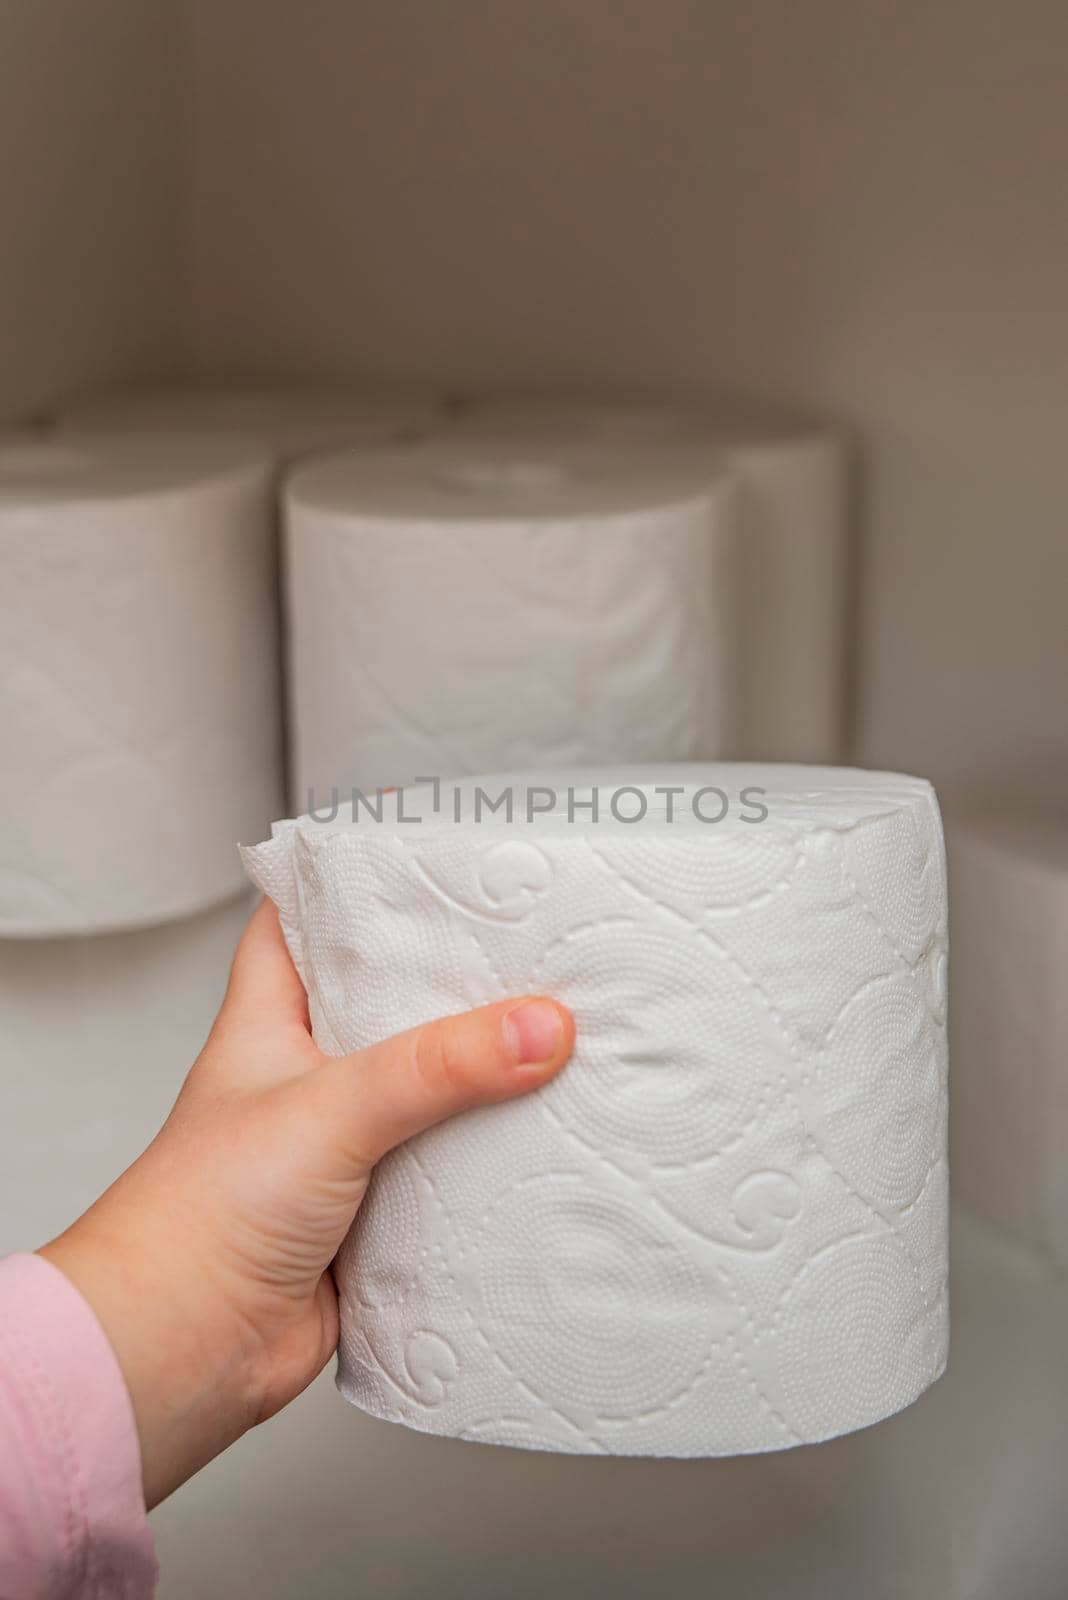 Roll of white toilet paper in hand. The child's hand takes a roll of toilet paper from the cabinet. Lots of toilet paper on background.